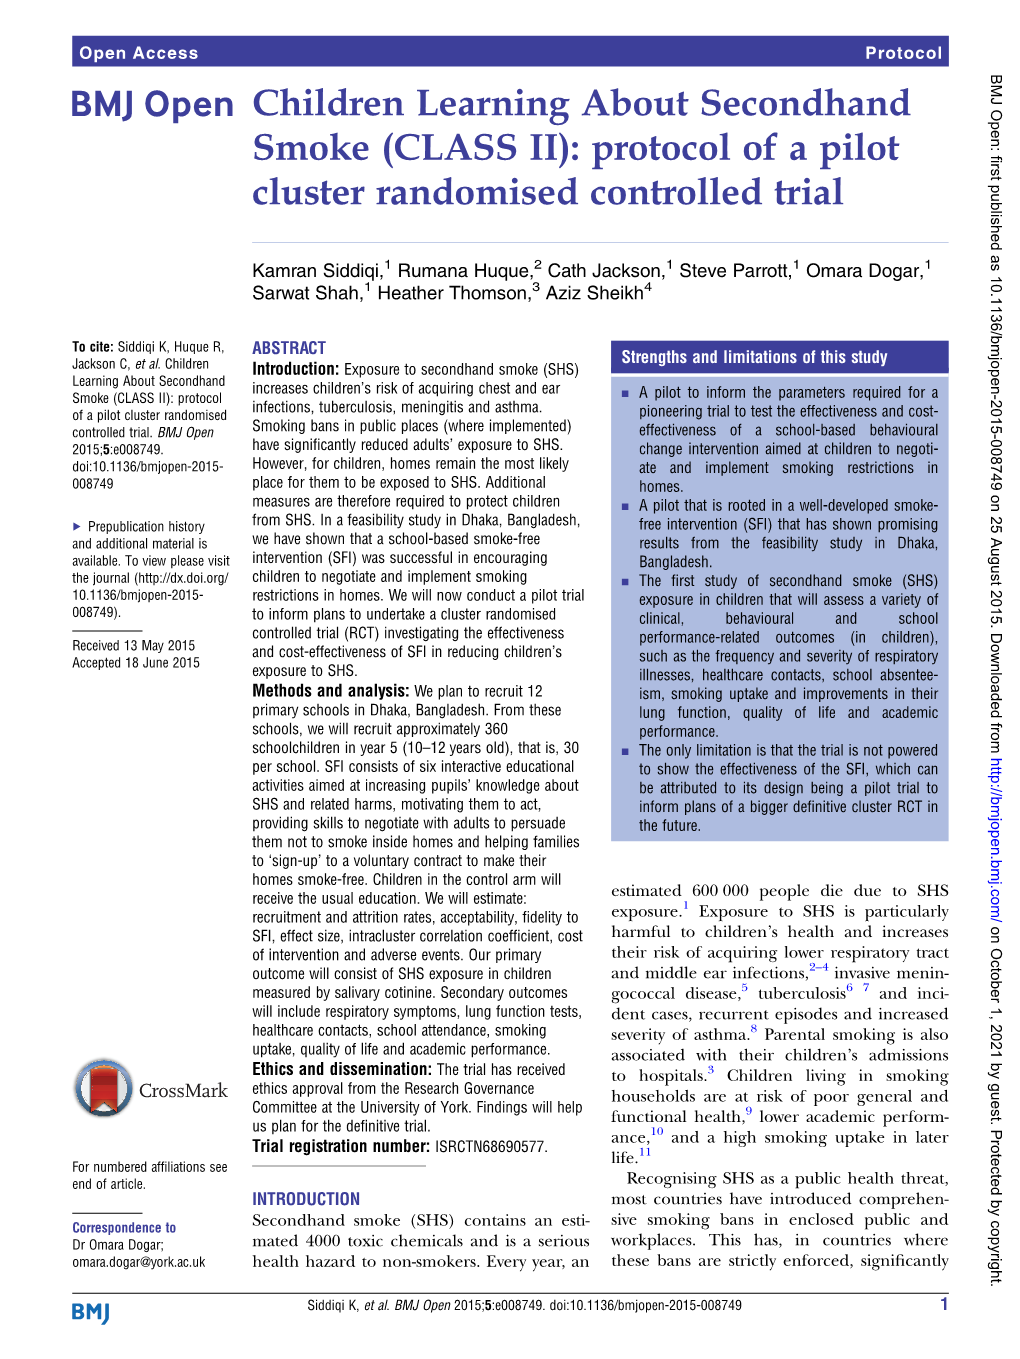 Protocol of a Pilot Cluster Randomised Controlled Trial